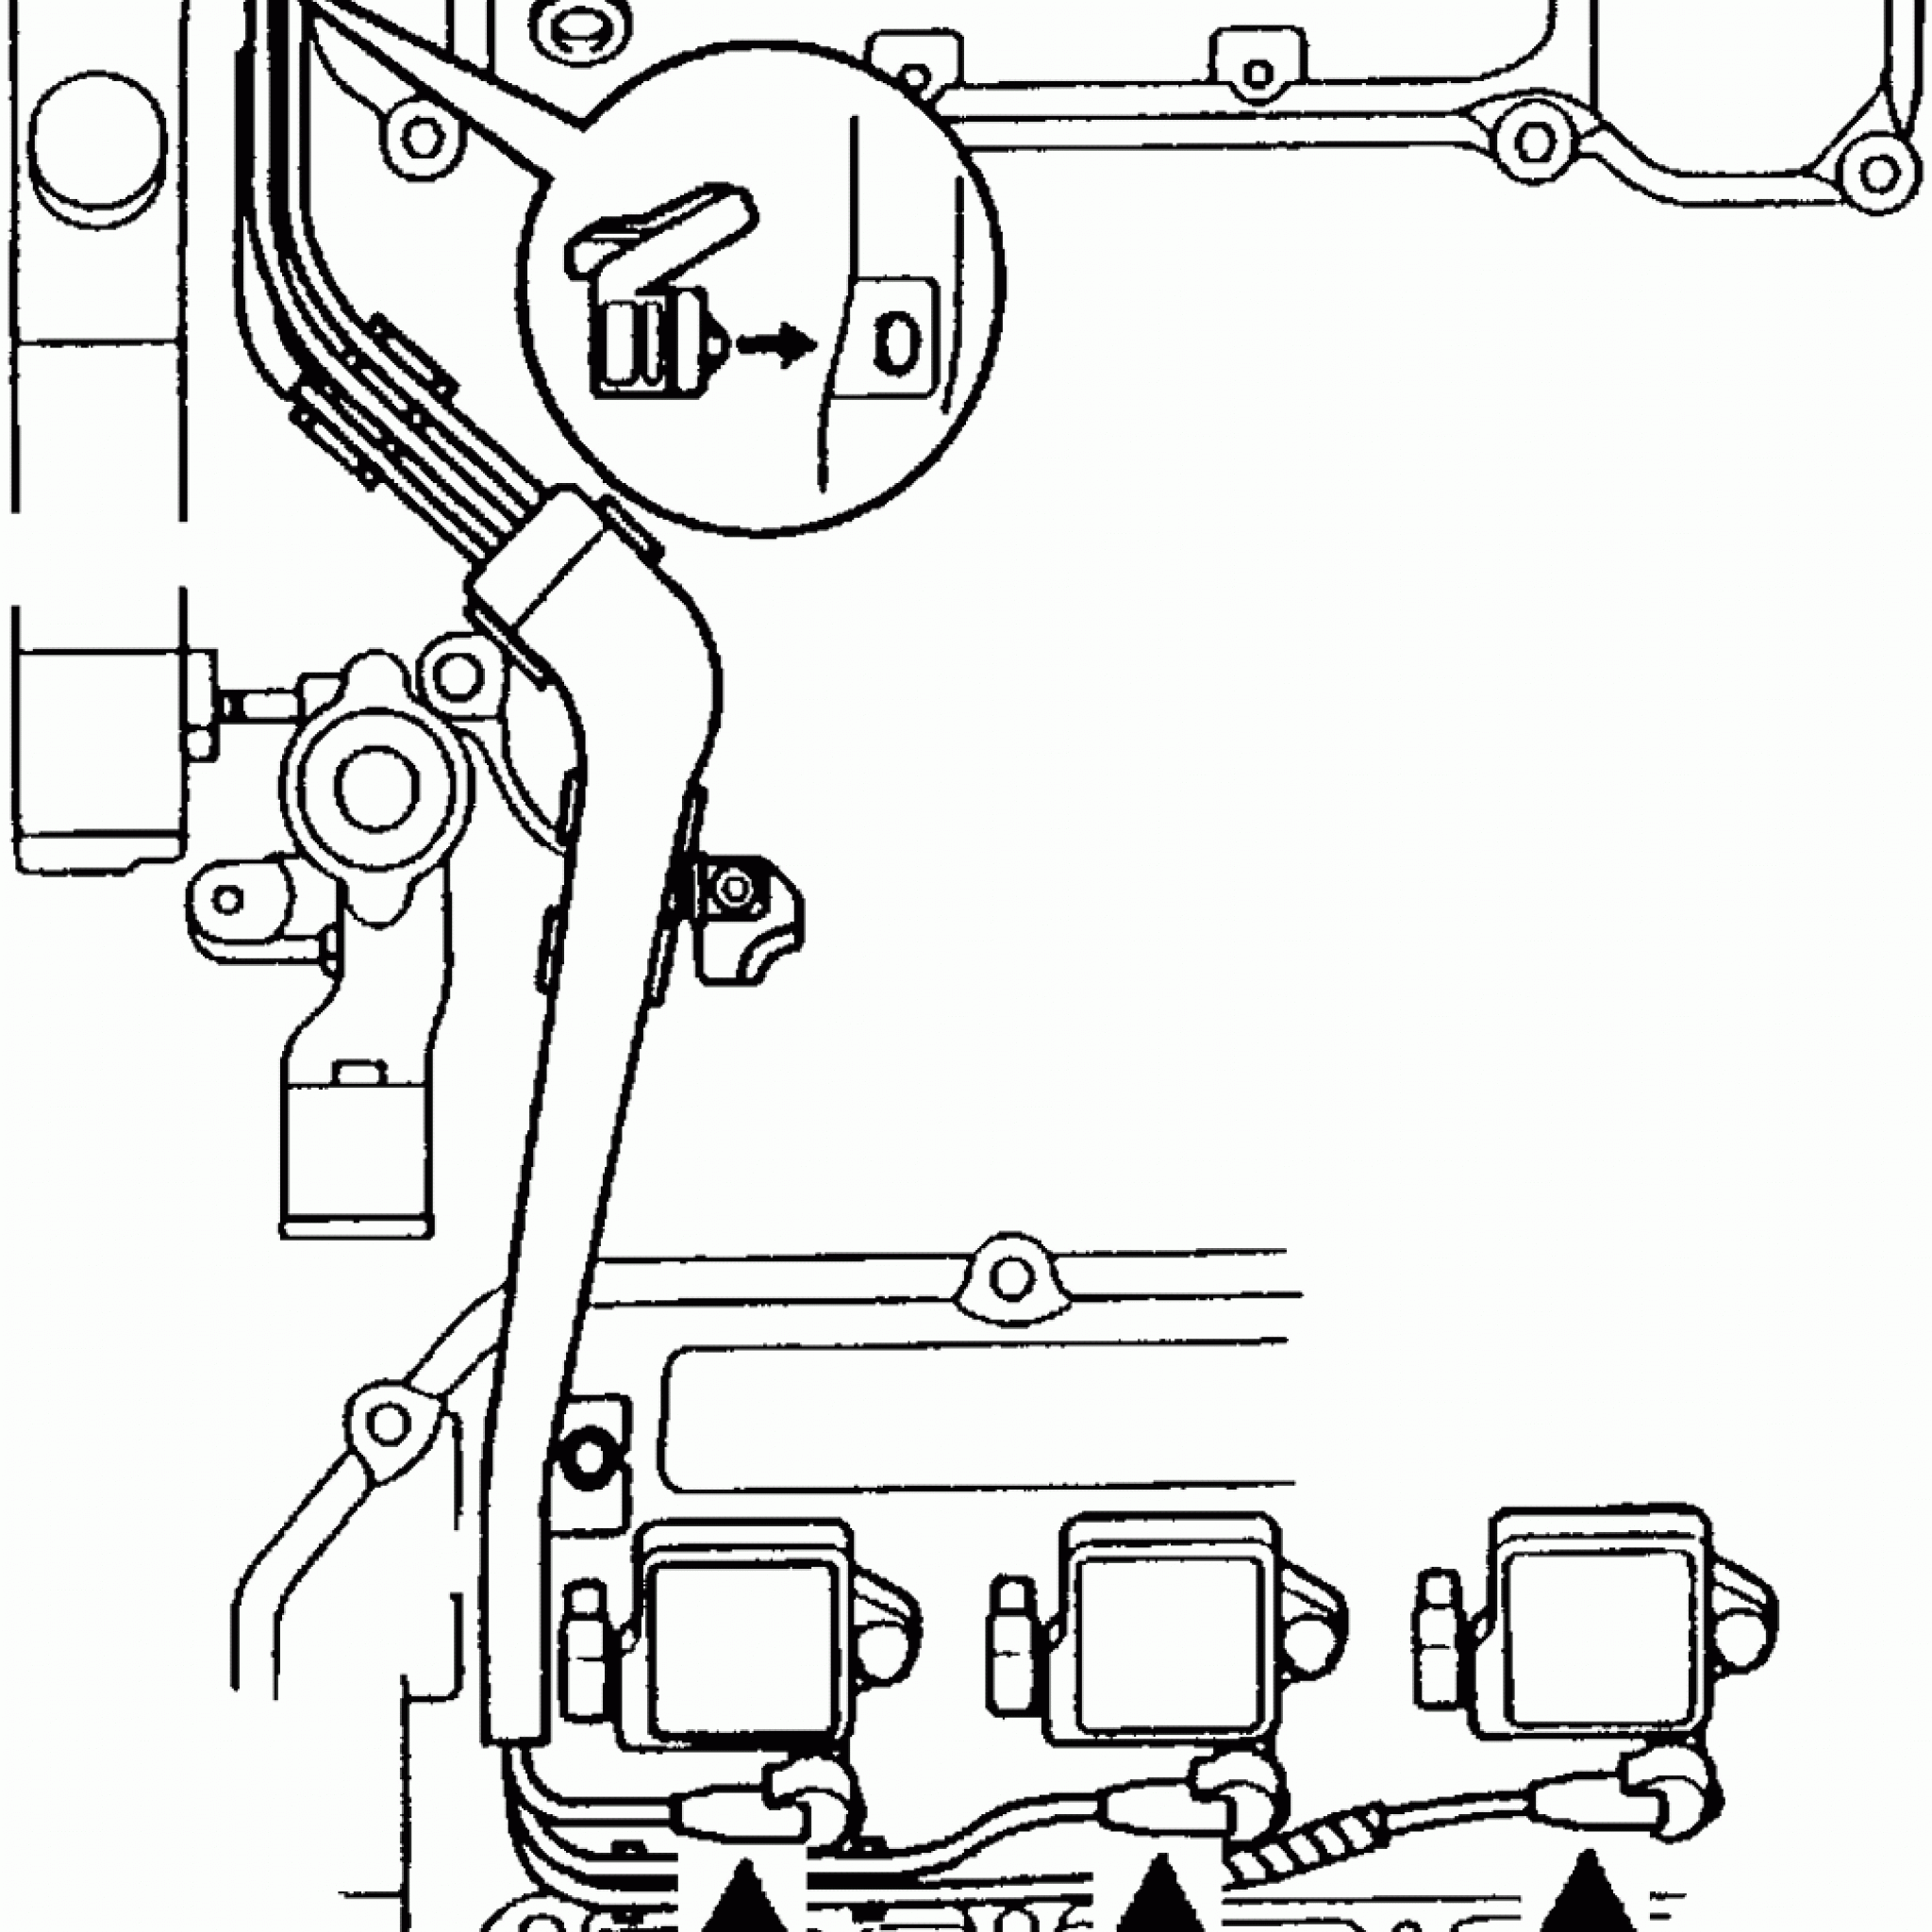 2001 ford ranger spark plug wire diagram infiniti i30 wiring and printable Free Toyota Wiring Diagrams 